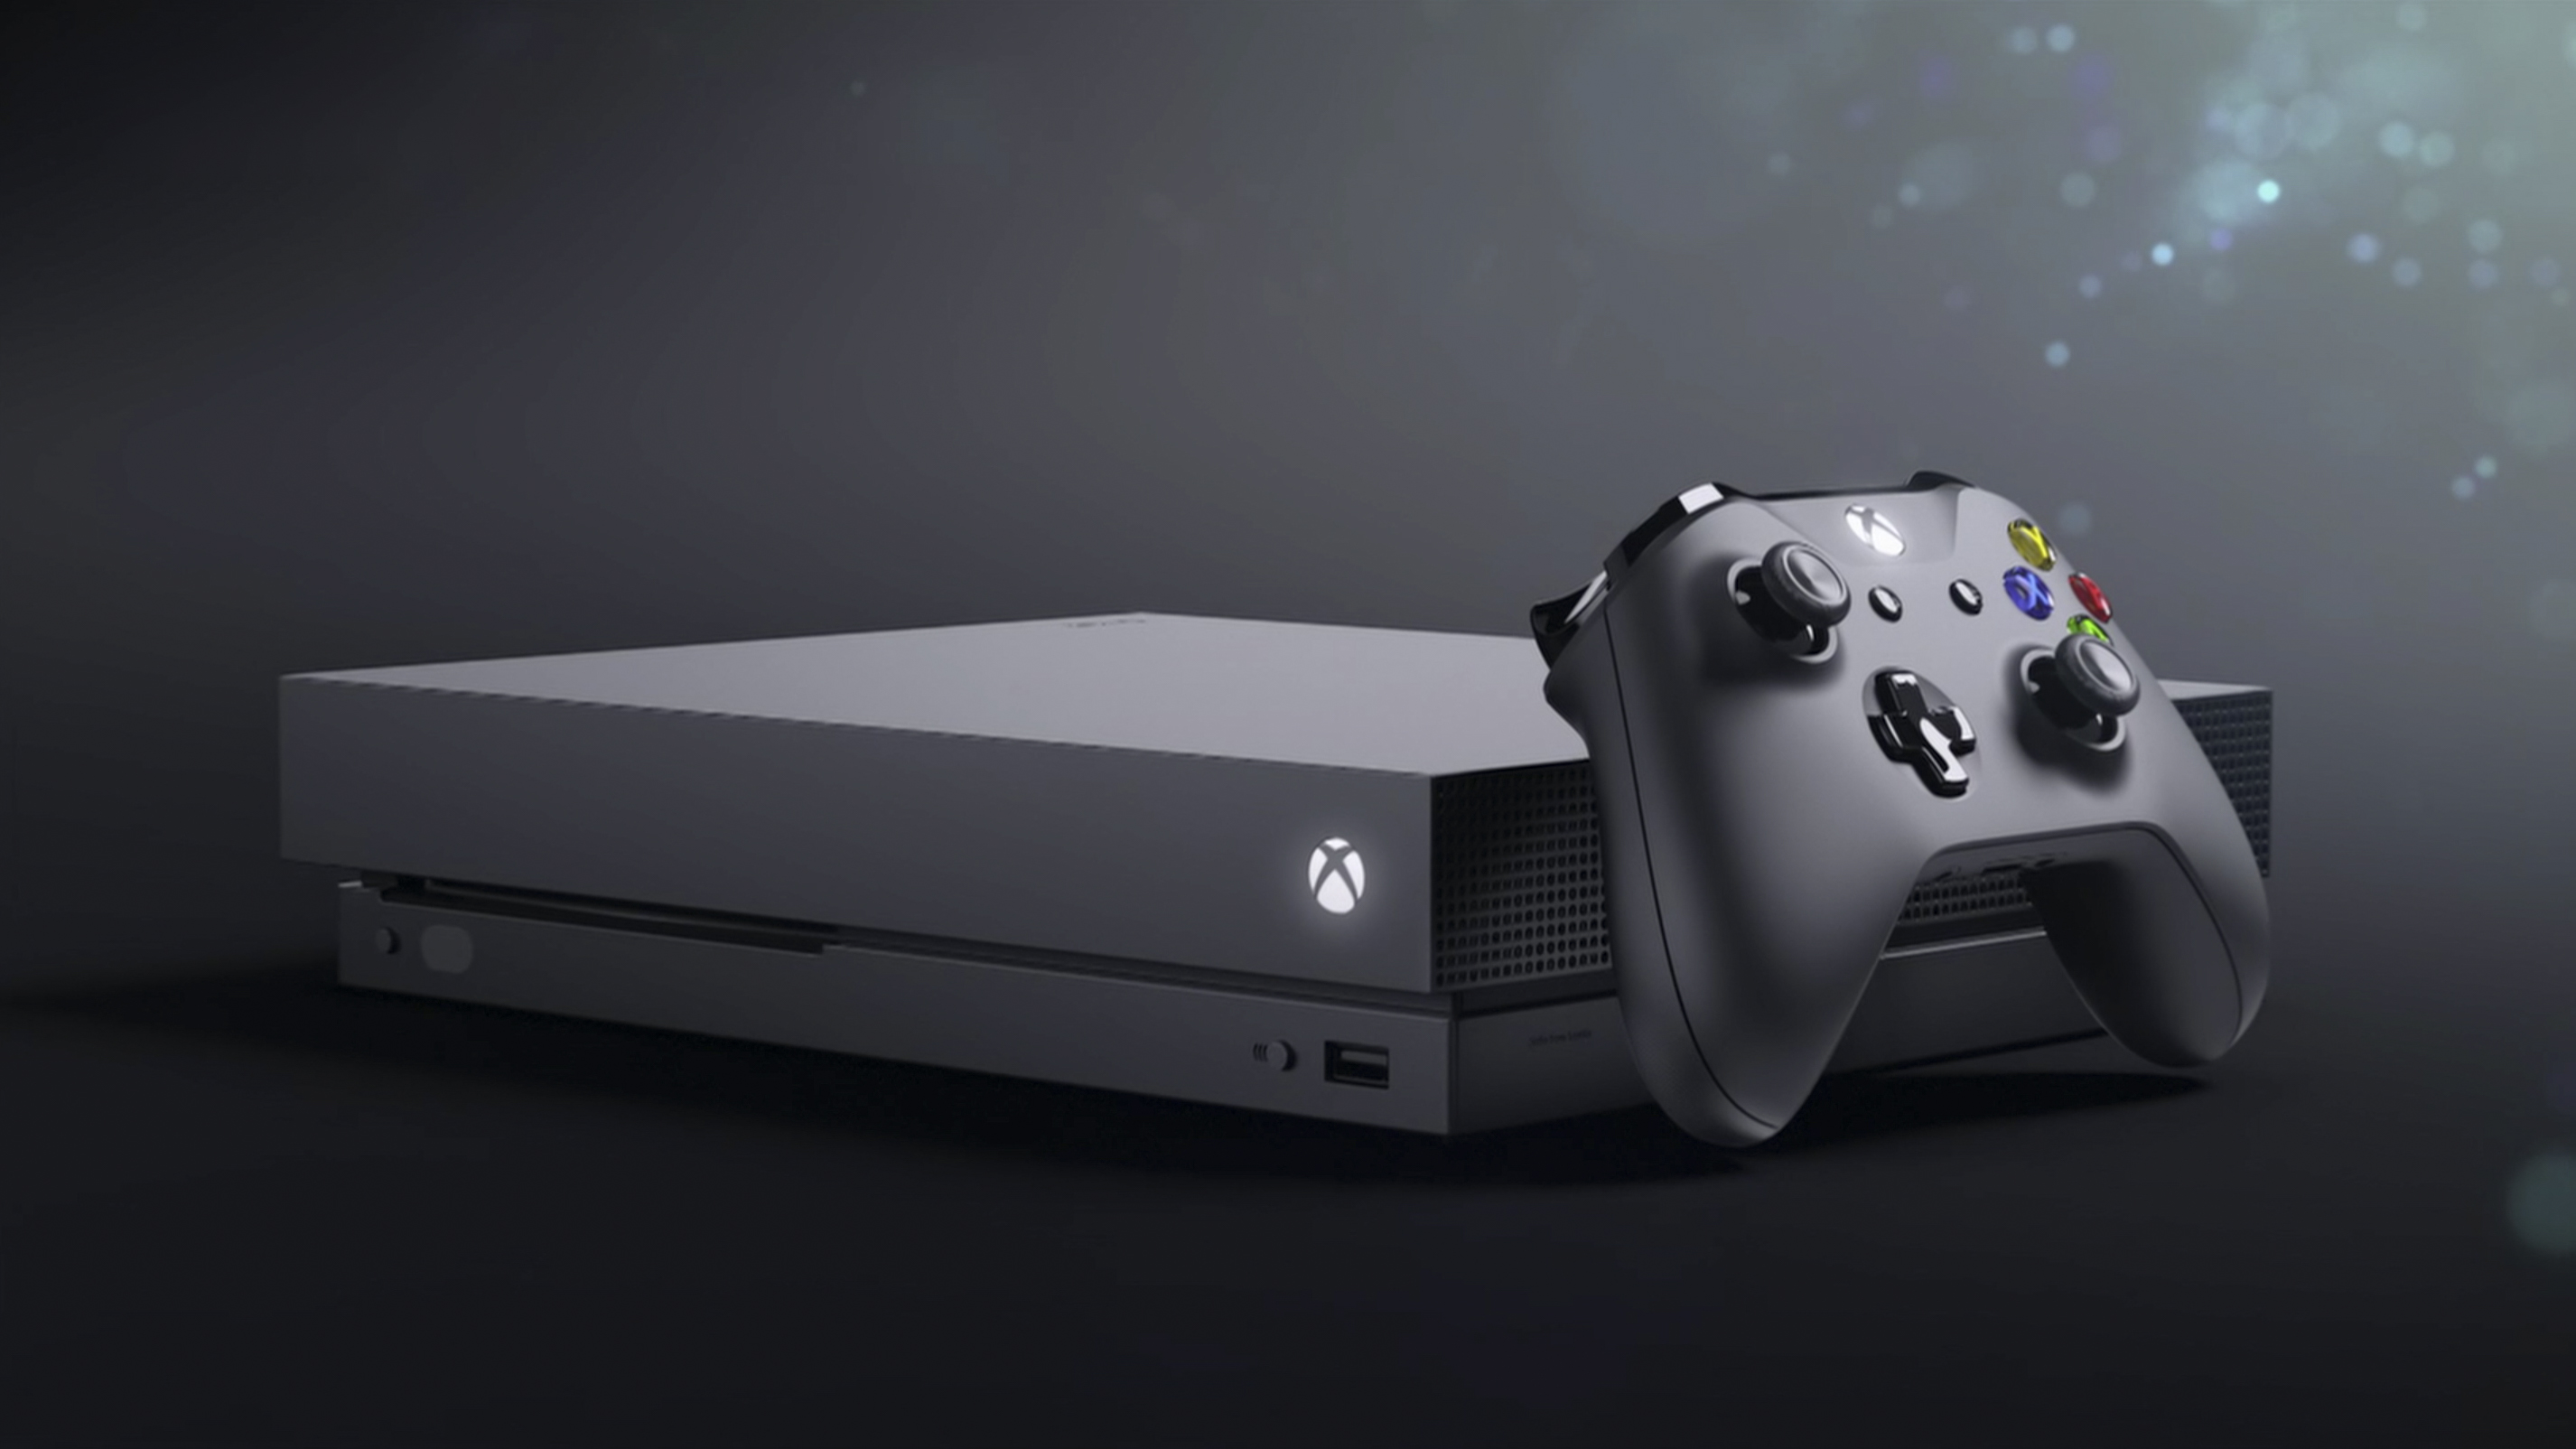 xbox one x announced screen shot 2017 06 11 at 2 03 12 pm